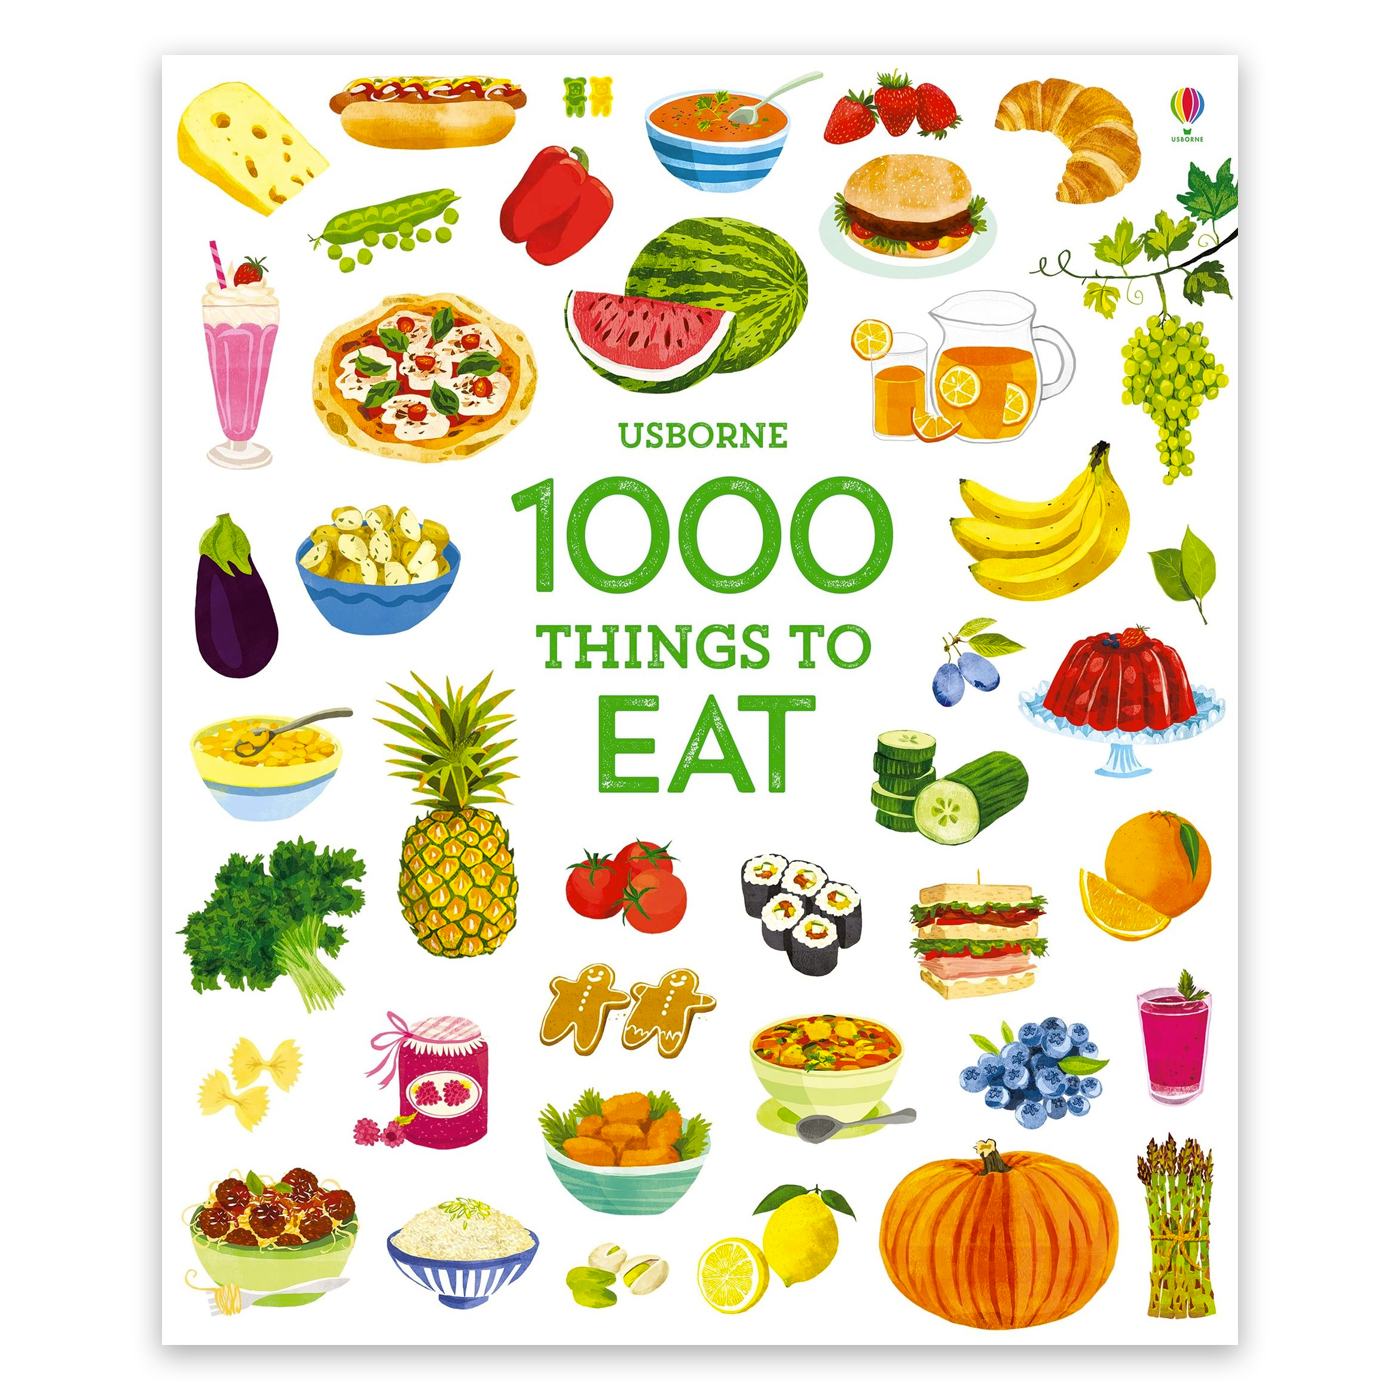  1000 Things to Eat